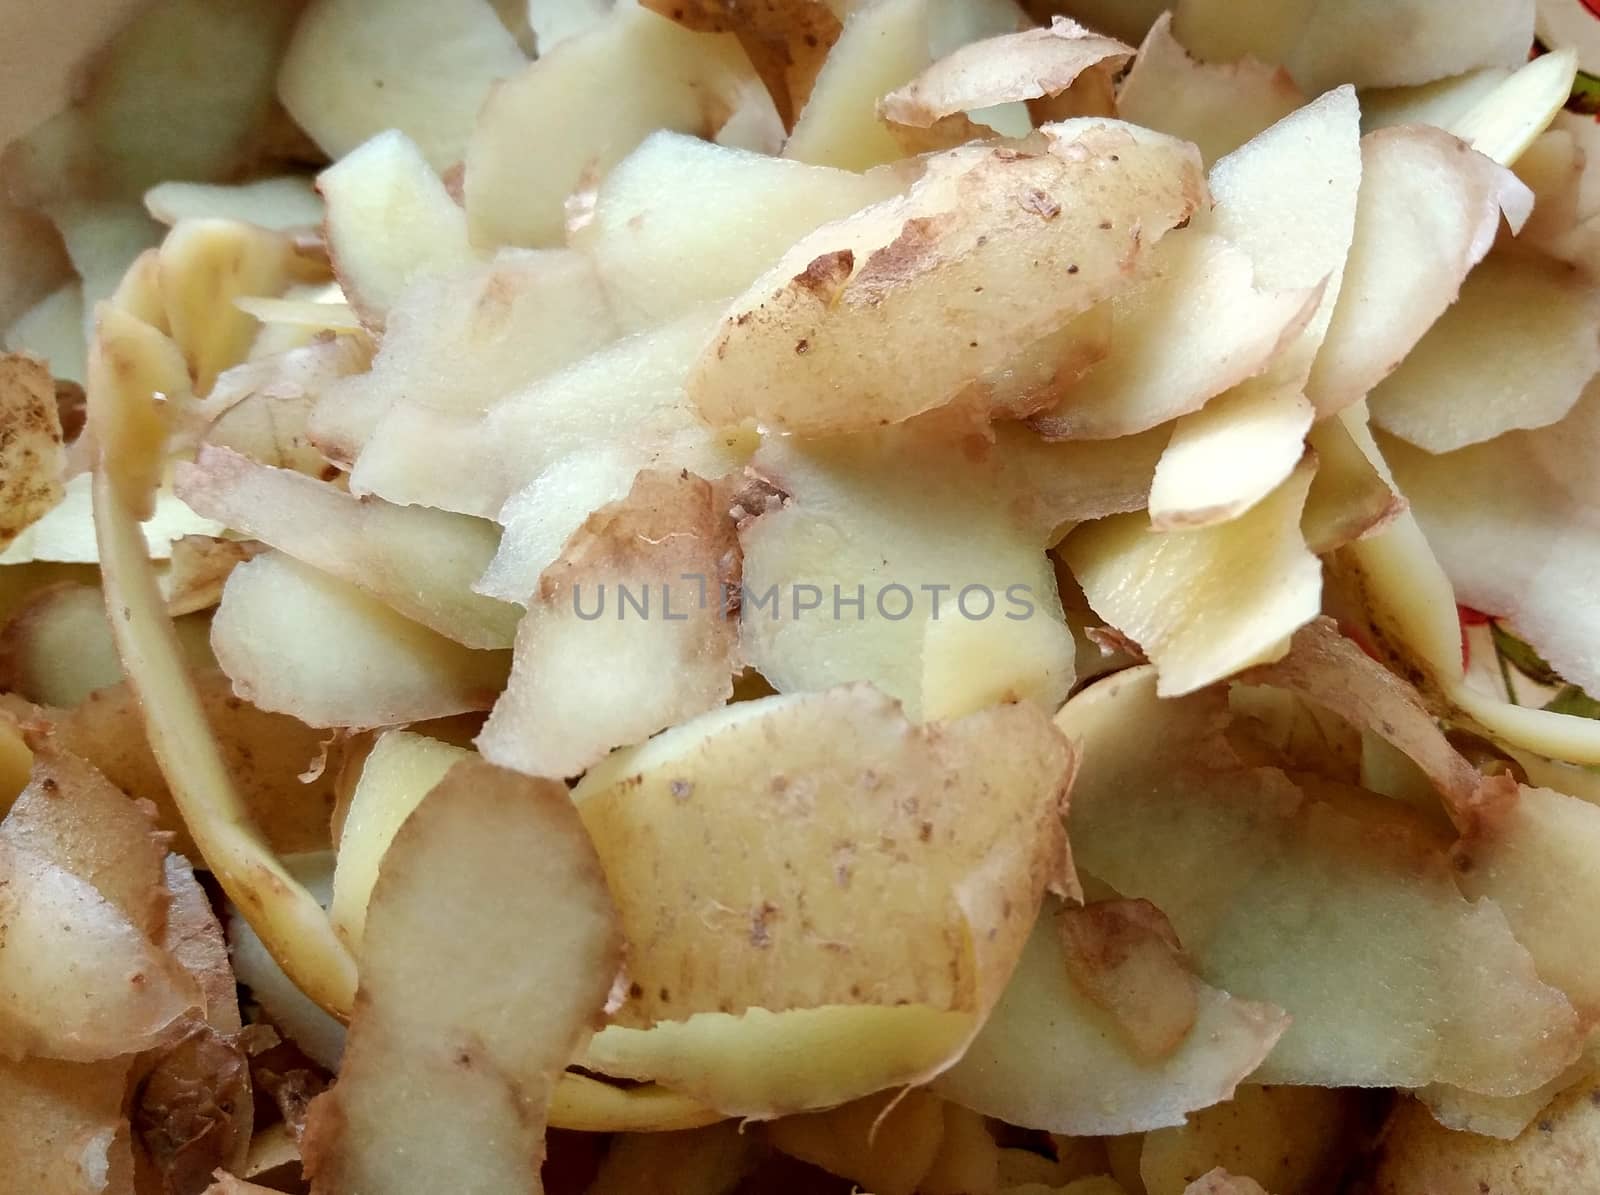 Potato peel, are used in many things